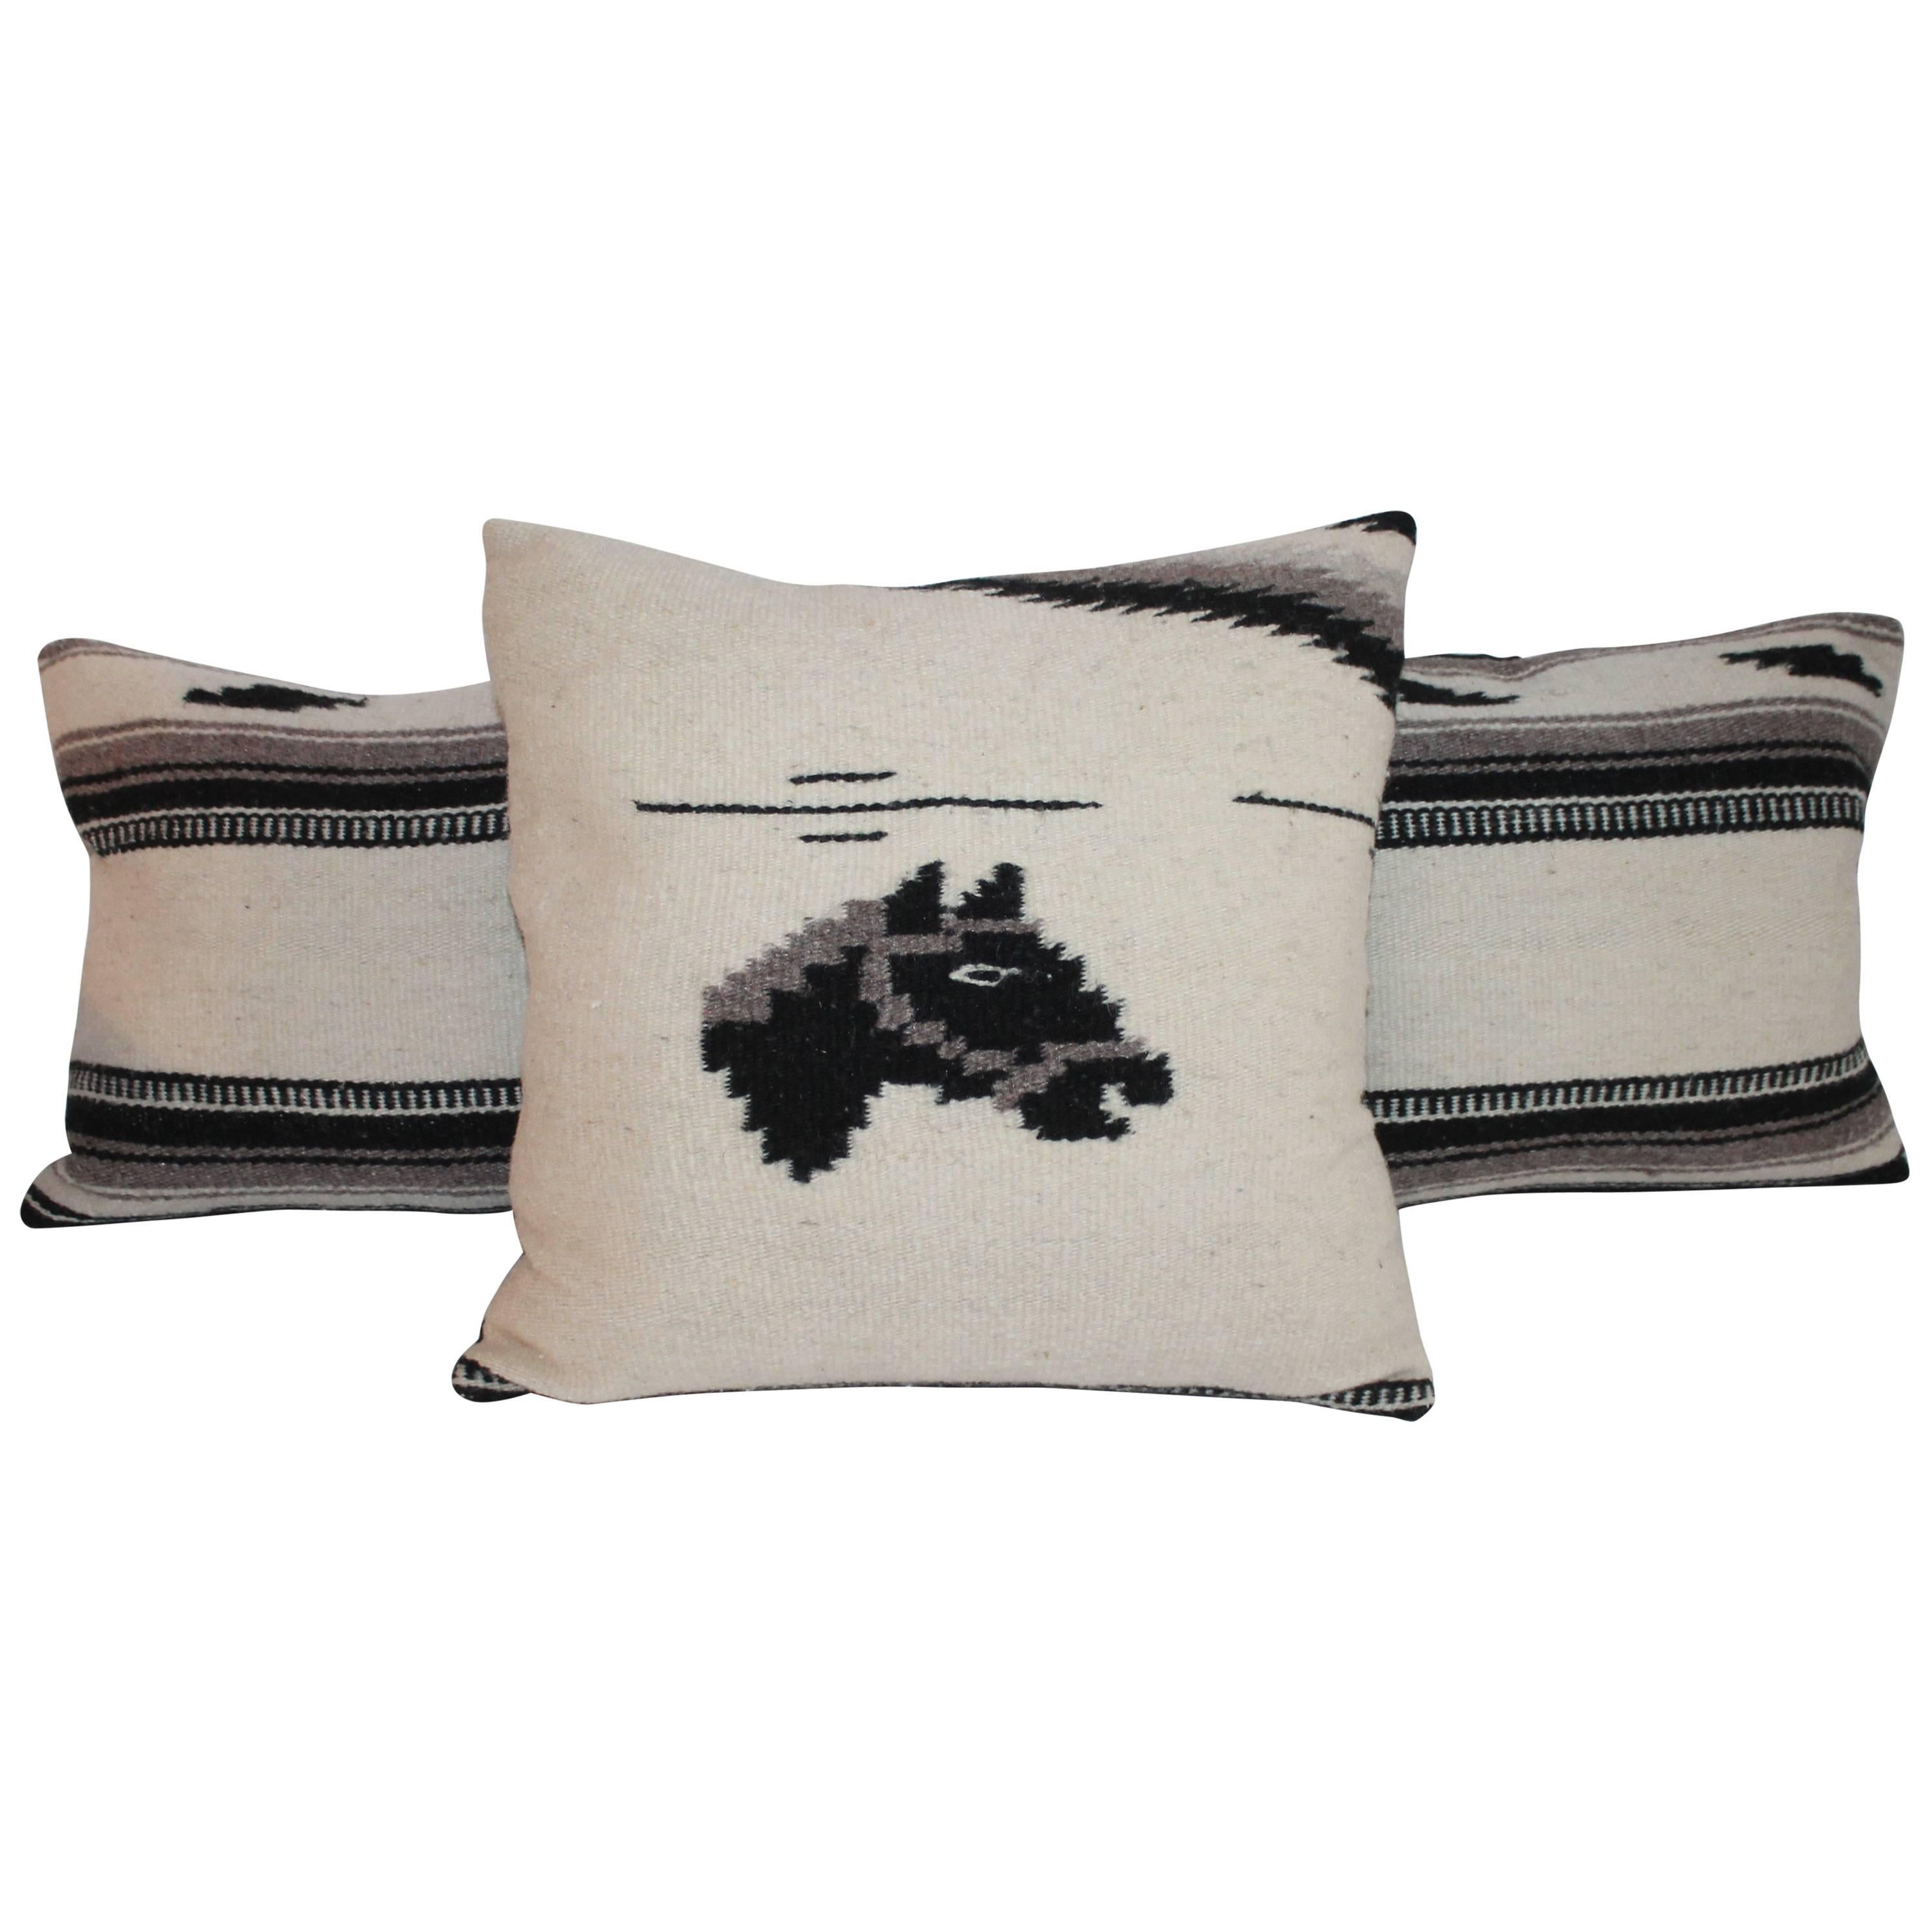 Woven Wool Horse Blanket Pillows or Collection of Three